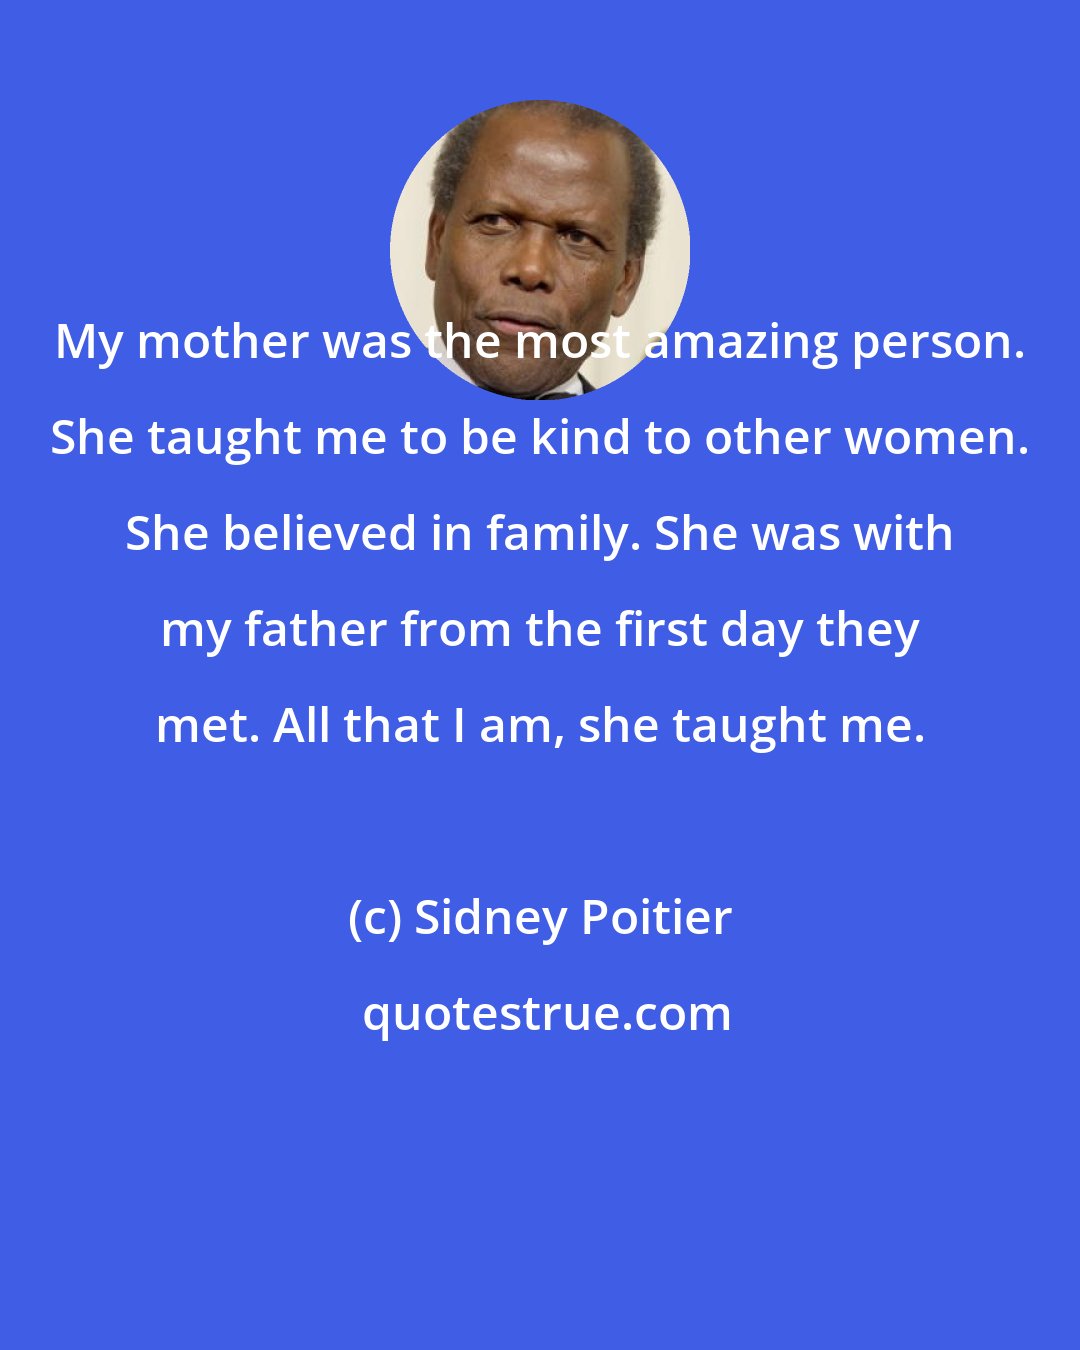 Sidney Poitier: My mother was the most amazing person. She taught me to be kind to other women. She believed in family. She was with my father from the first day they met. All that I am, she taught me.